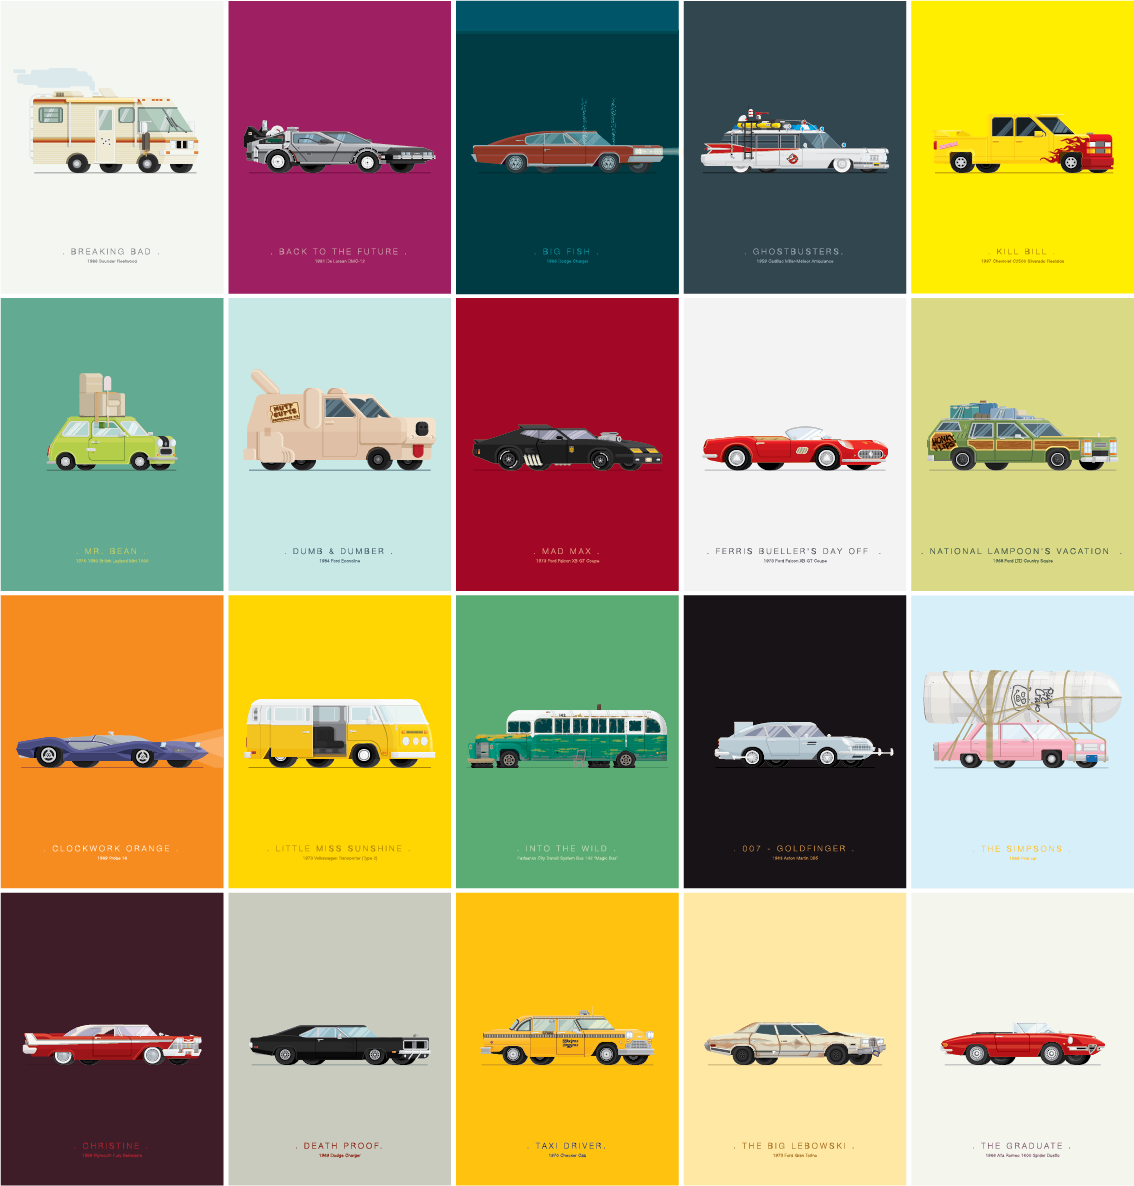 famous cars  car movie Little Miss Sunshine into the wild 007 goldfinger the little rascals christine death proof taxi driver Big Lebowski the graduate big fish the simpsons